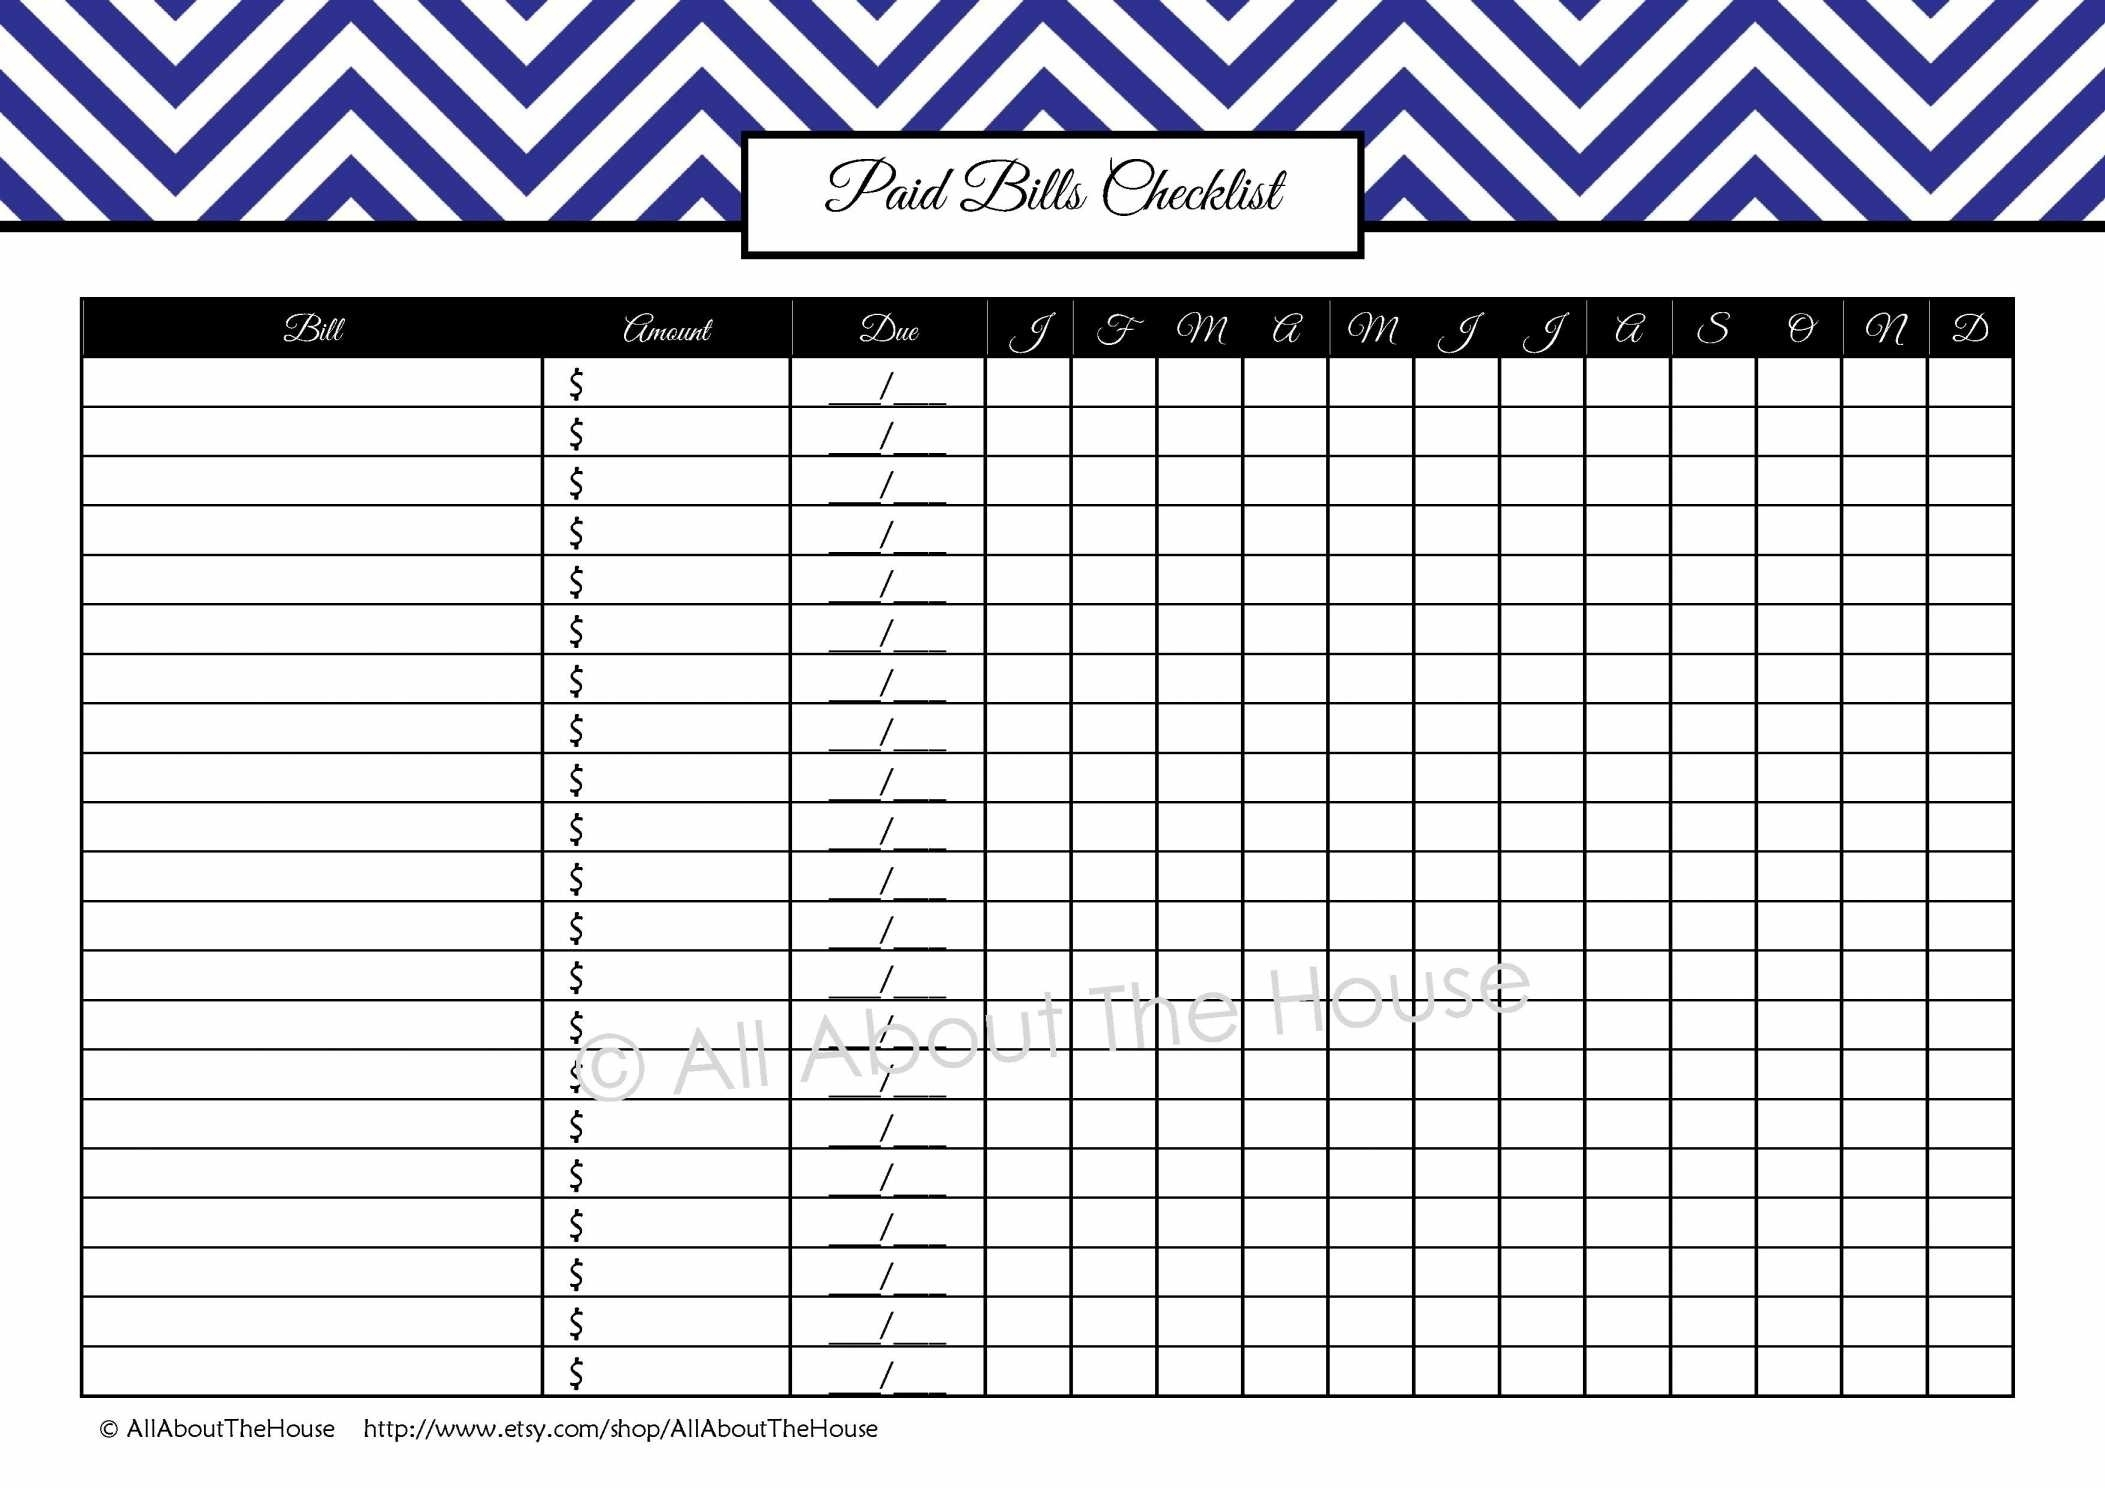 Free Printable Monthly Bill Tracker  Template Calendar Design with Bill Organizer Printable